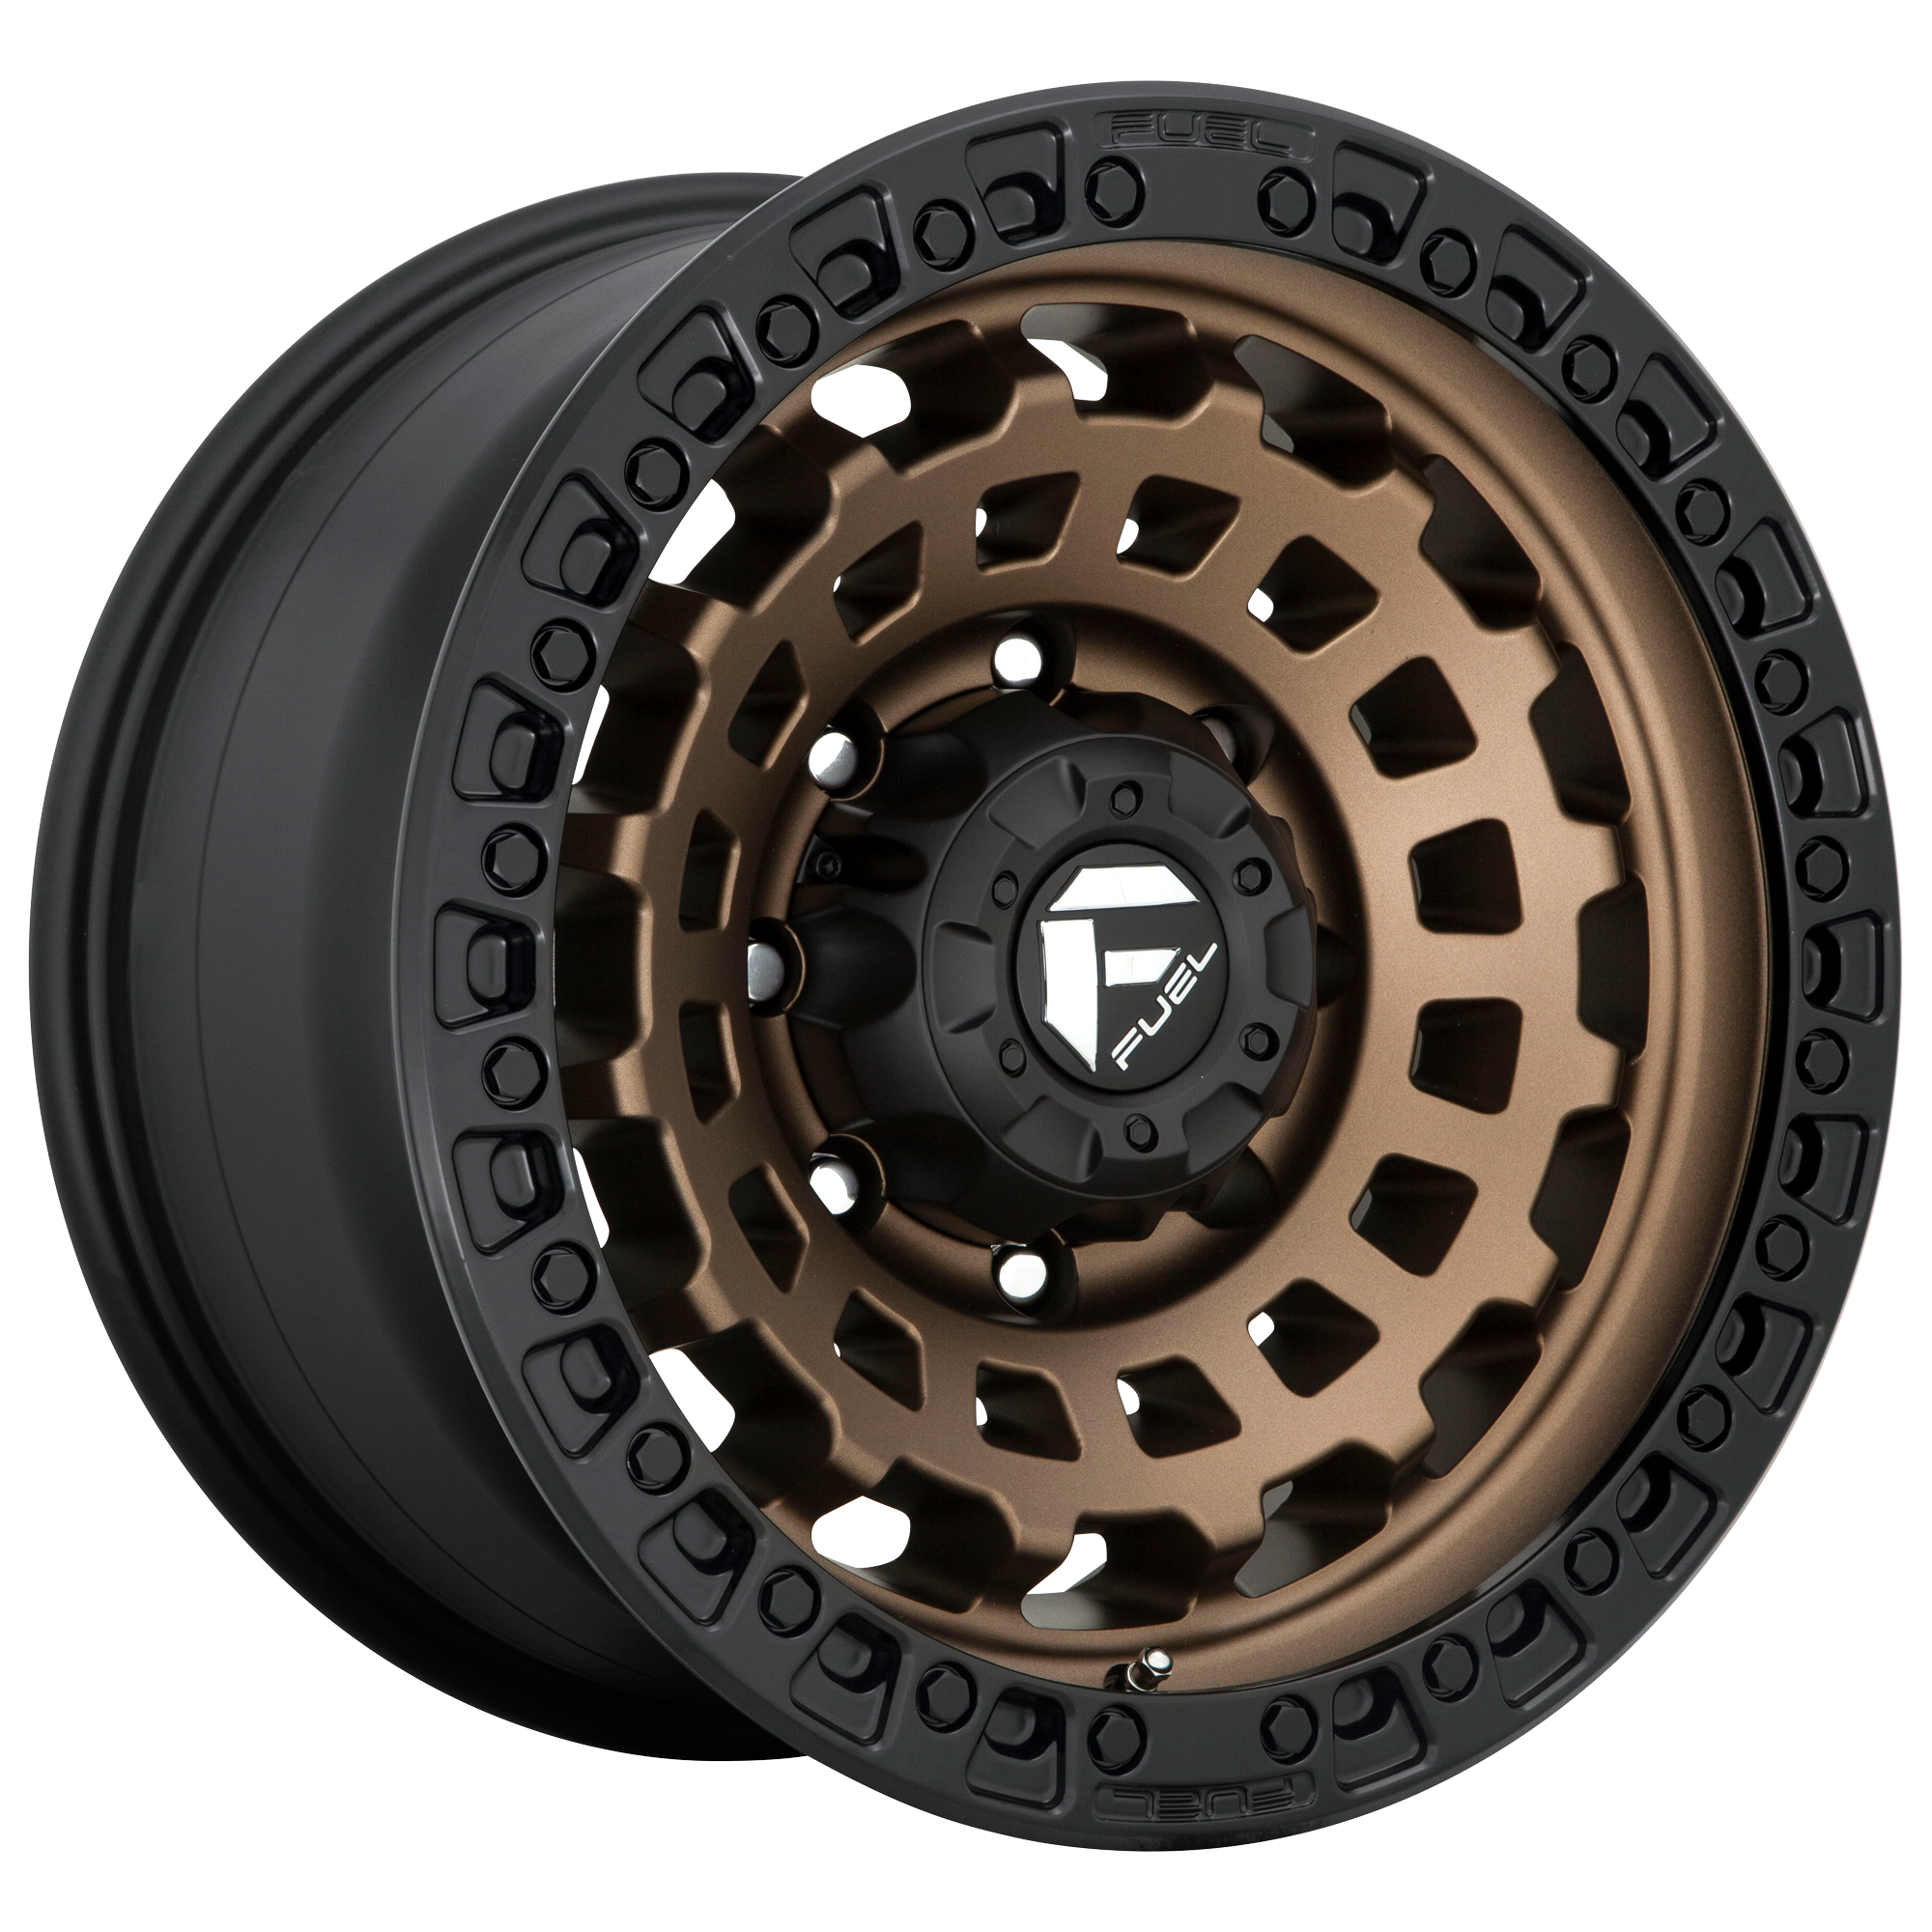 ZEPHYR 20x9 6x135.00 MATTE BRONZE BLACK BEAD RING (1 mm) - Tires and Engine Performance